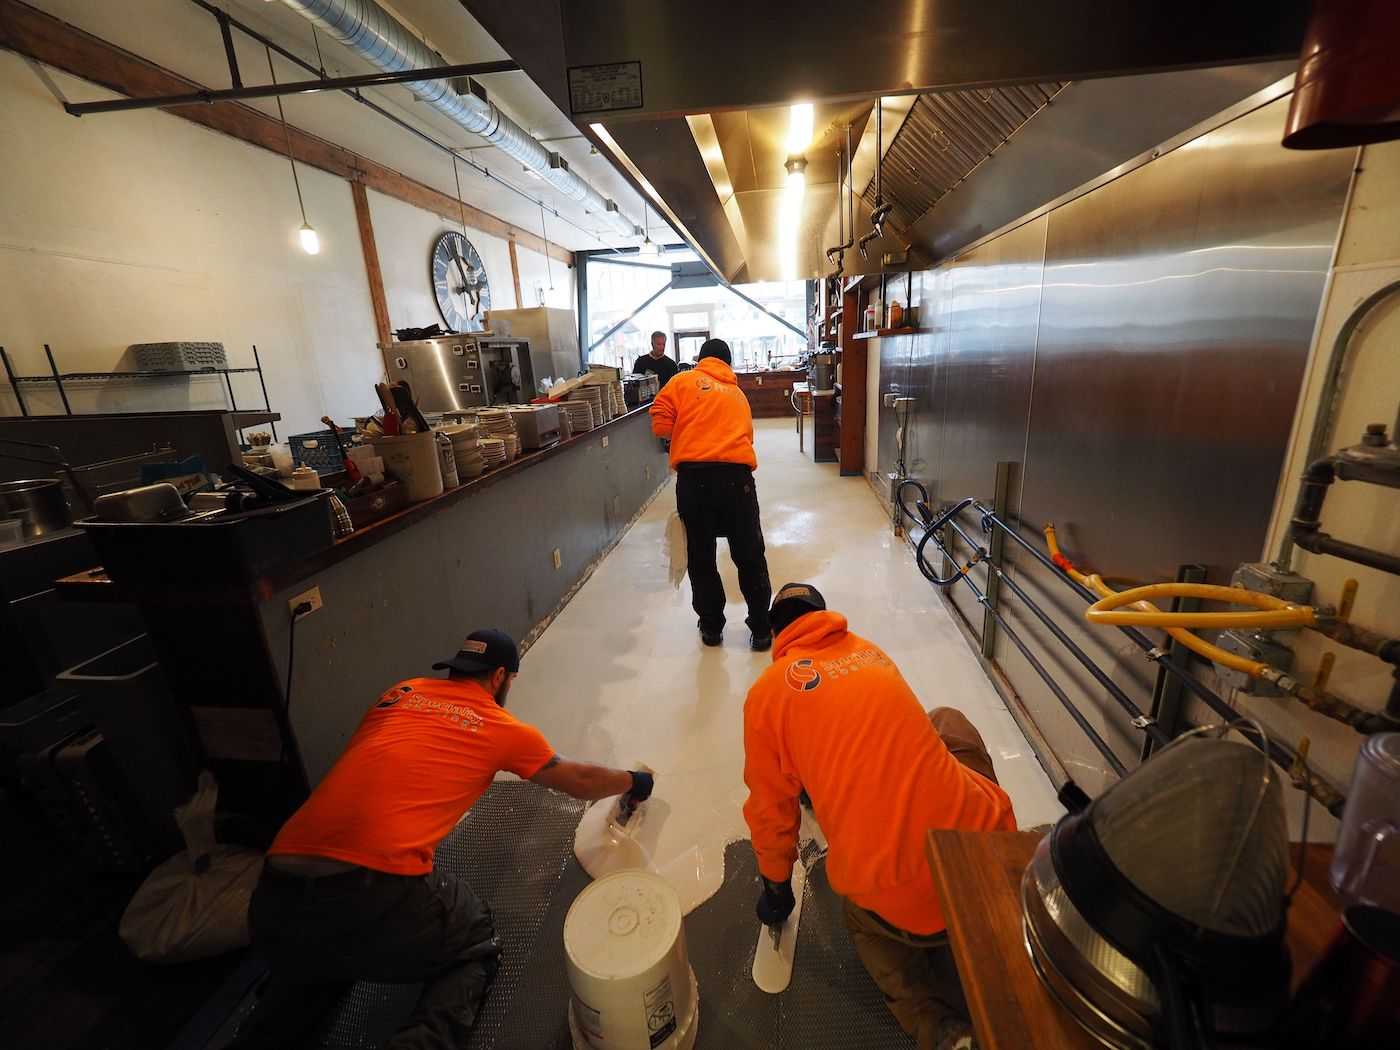 Restaurant Floor Coating Services by Specialty Coatings